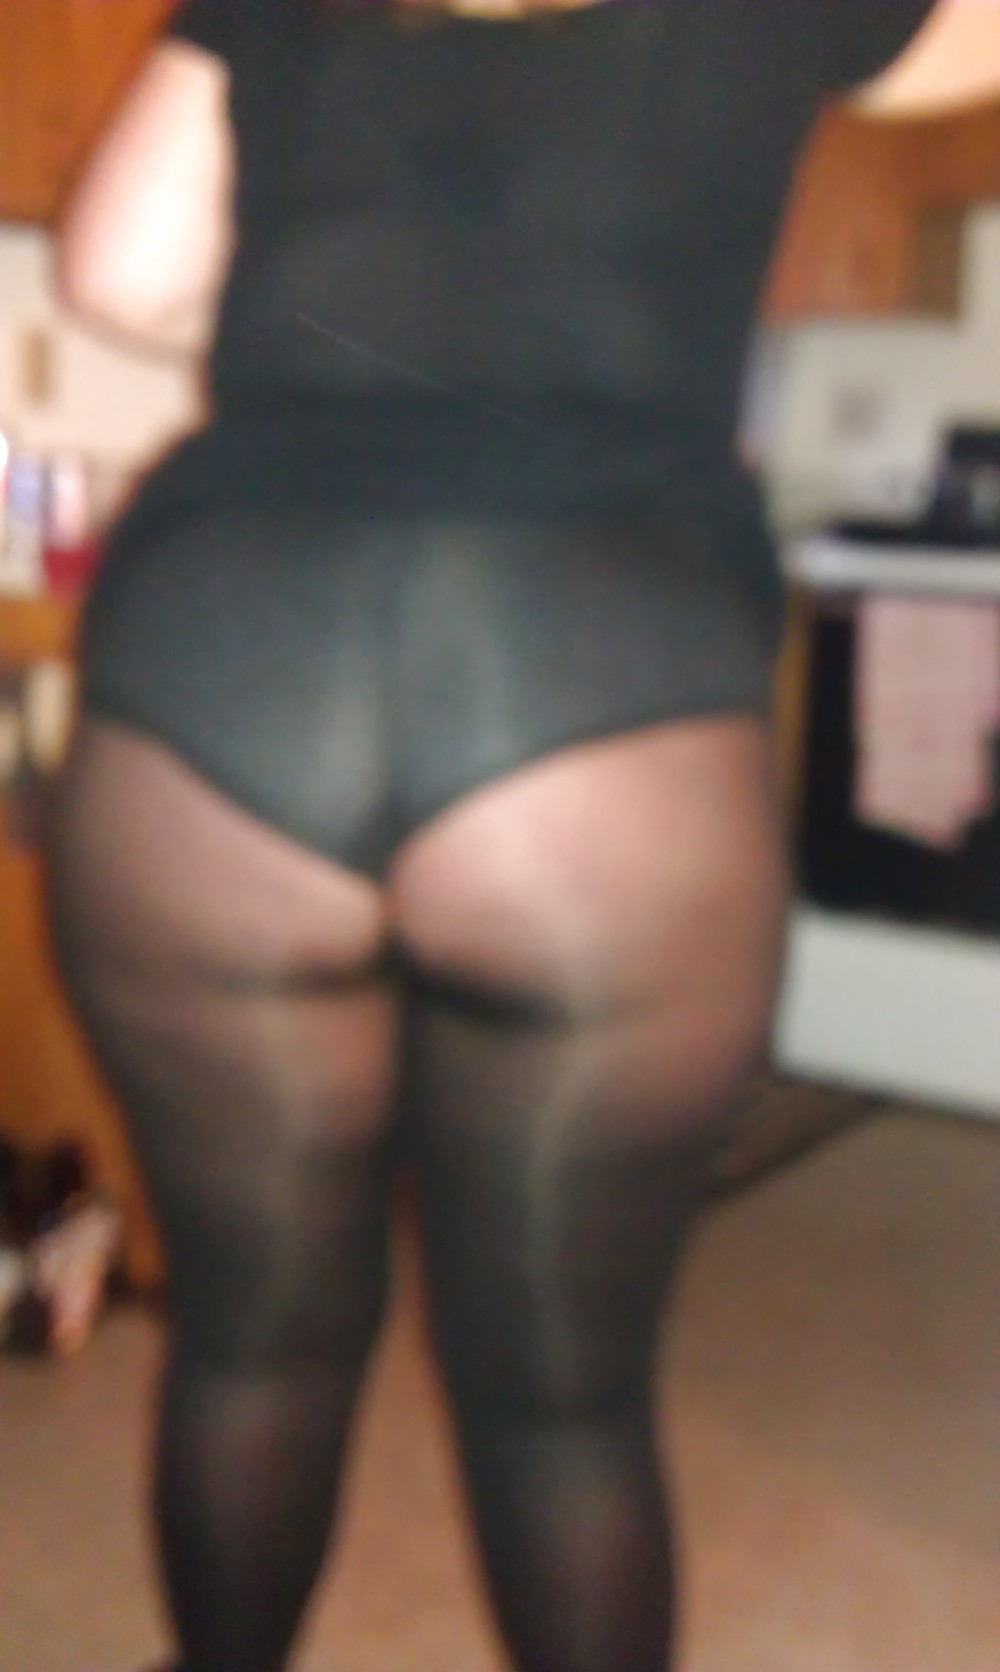 BBW Hipster in nylons and pussy and ass shots